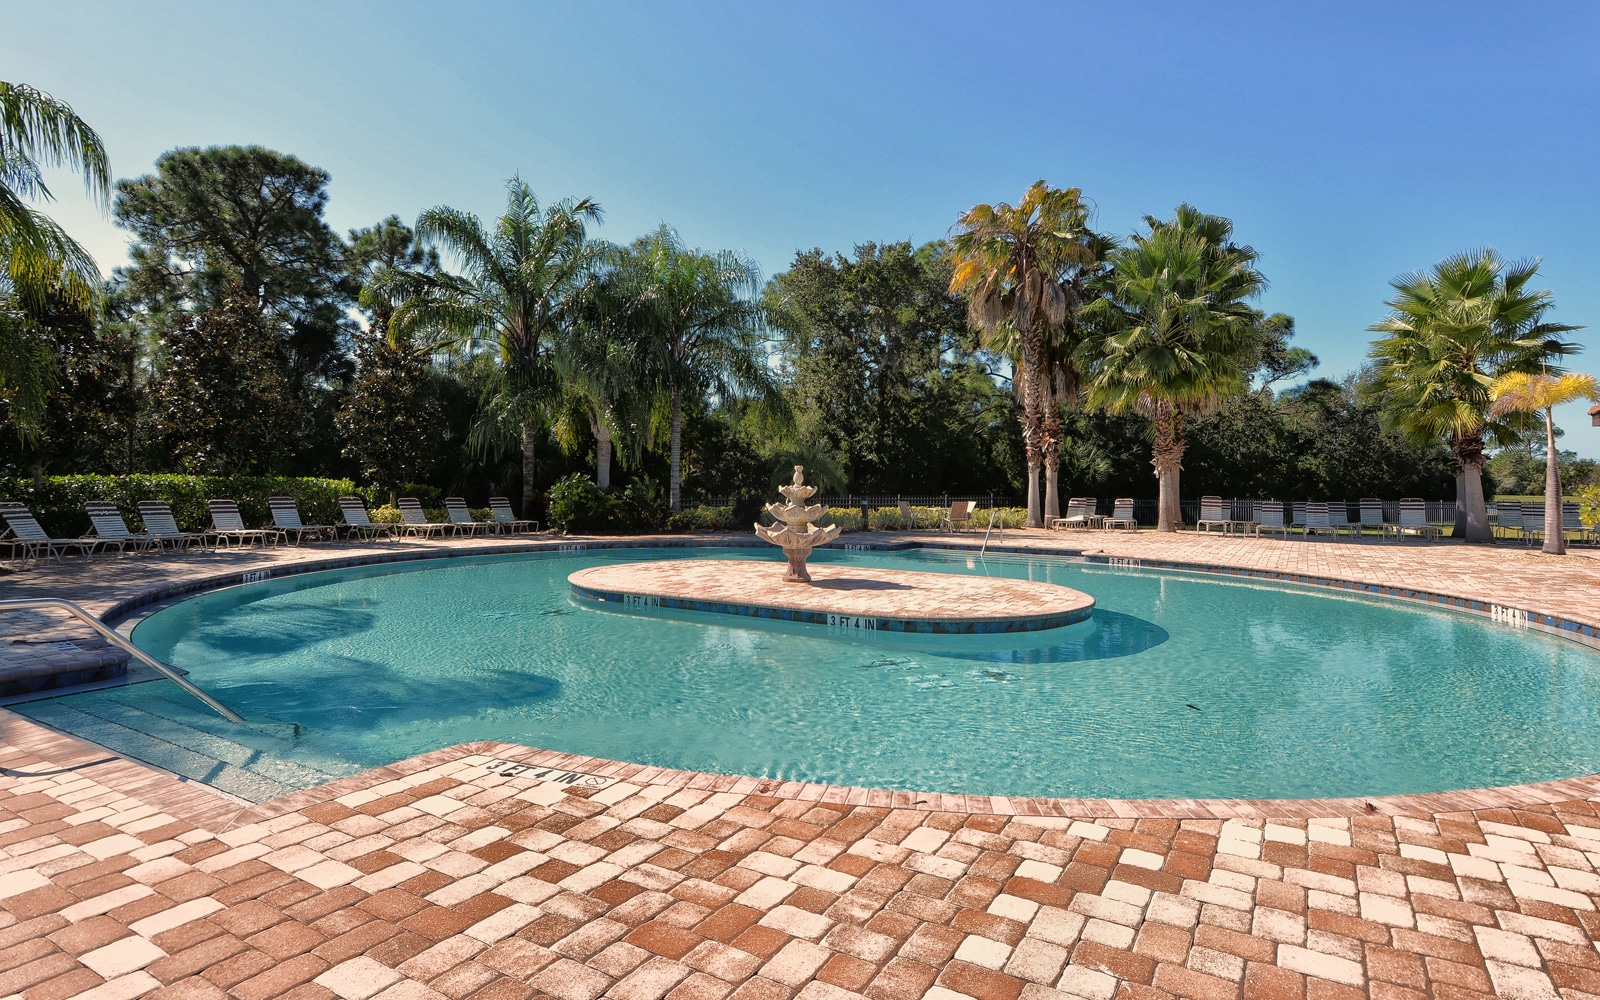 Venetian Falls in Venice : Villas & Homes for Sale in a Gated Community